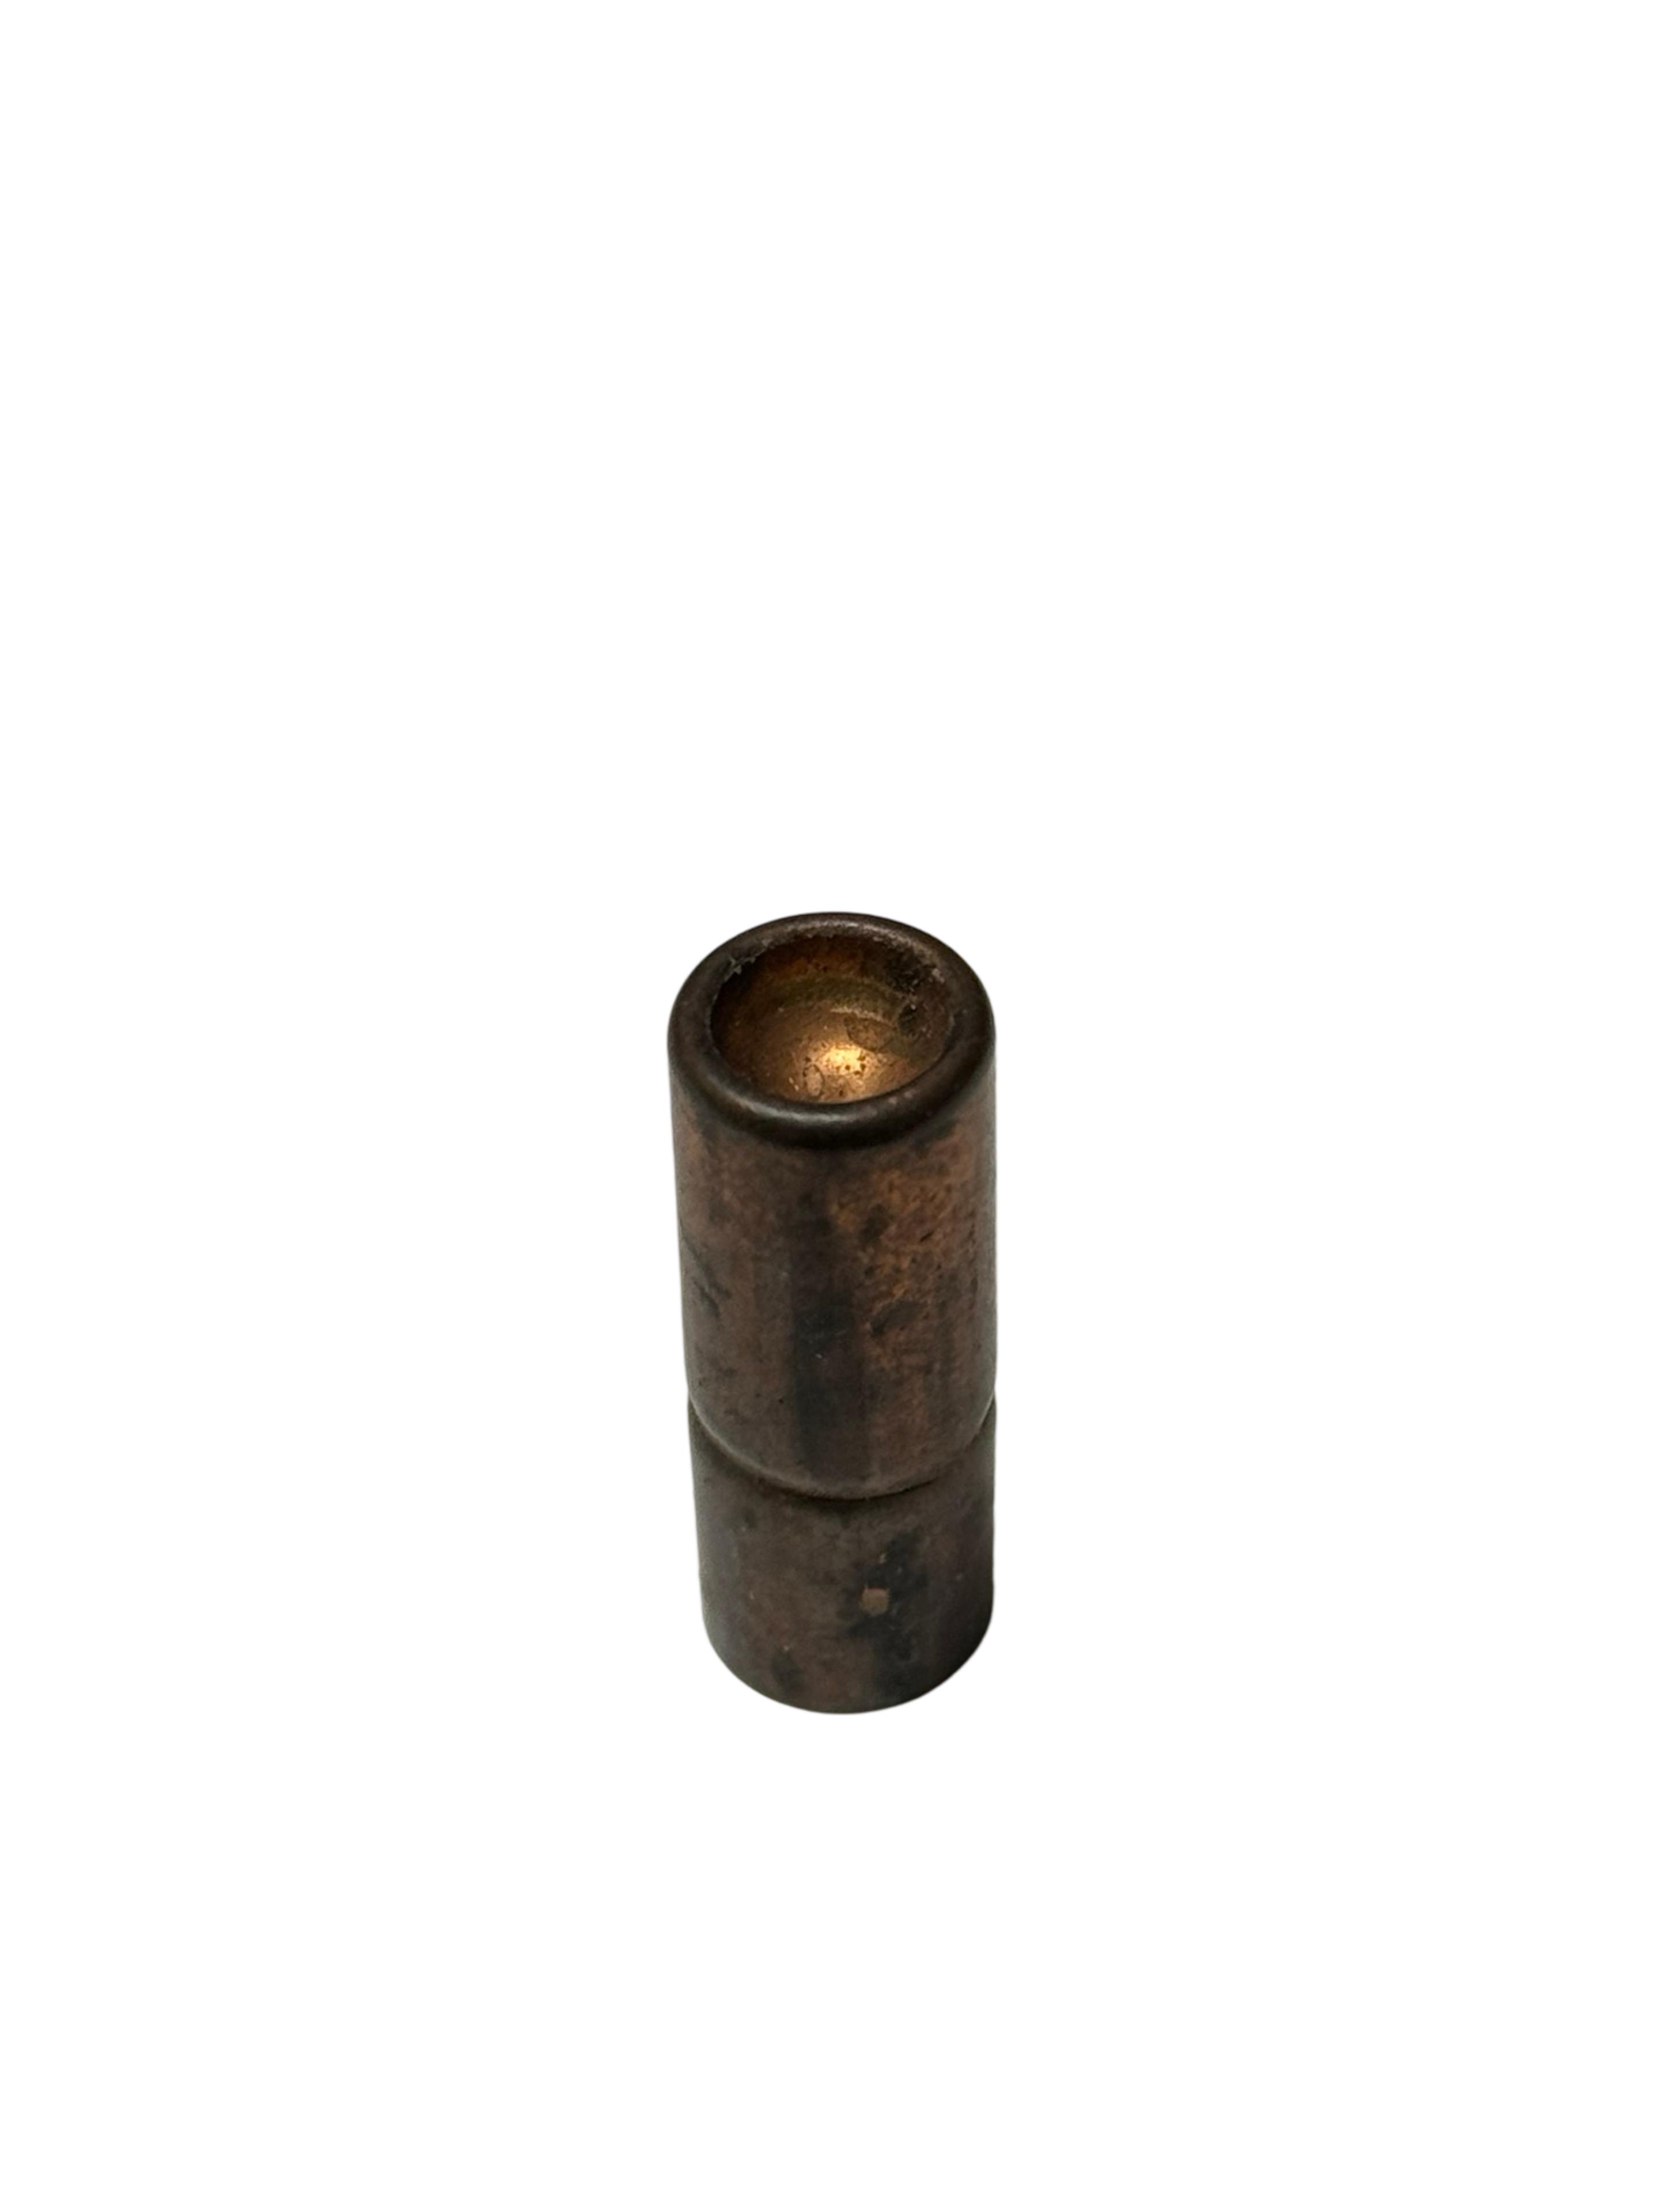 RARE .41 Front Loading Cup Primer Cartridge